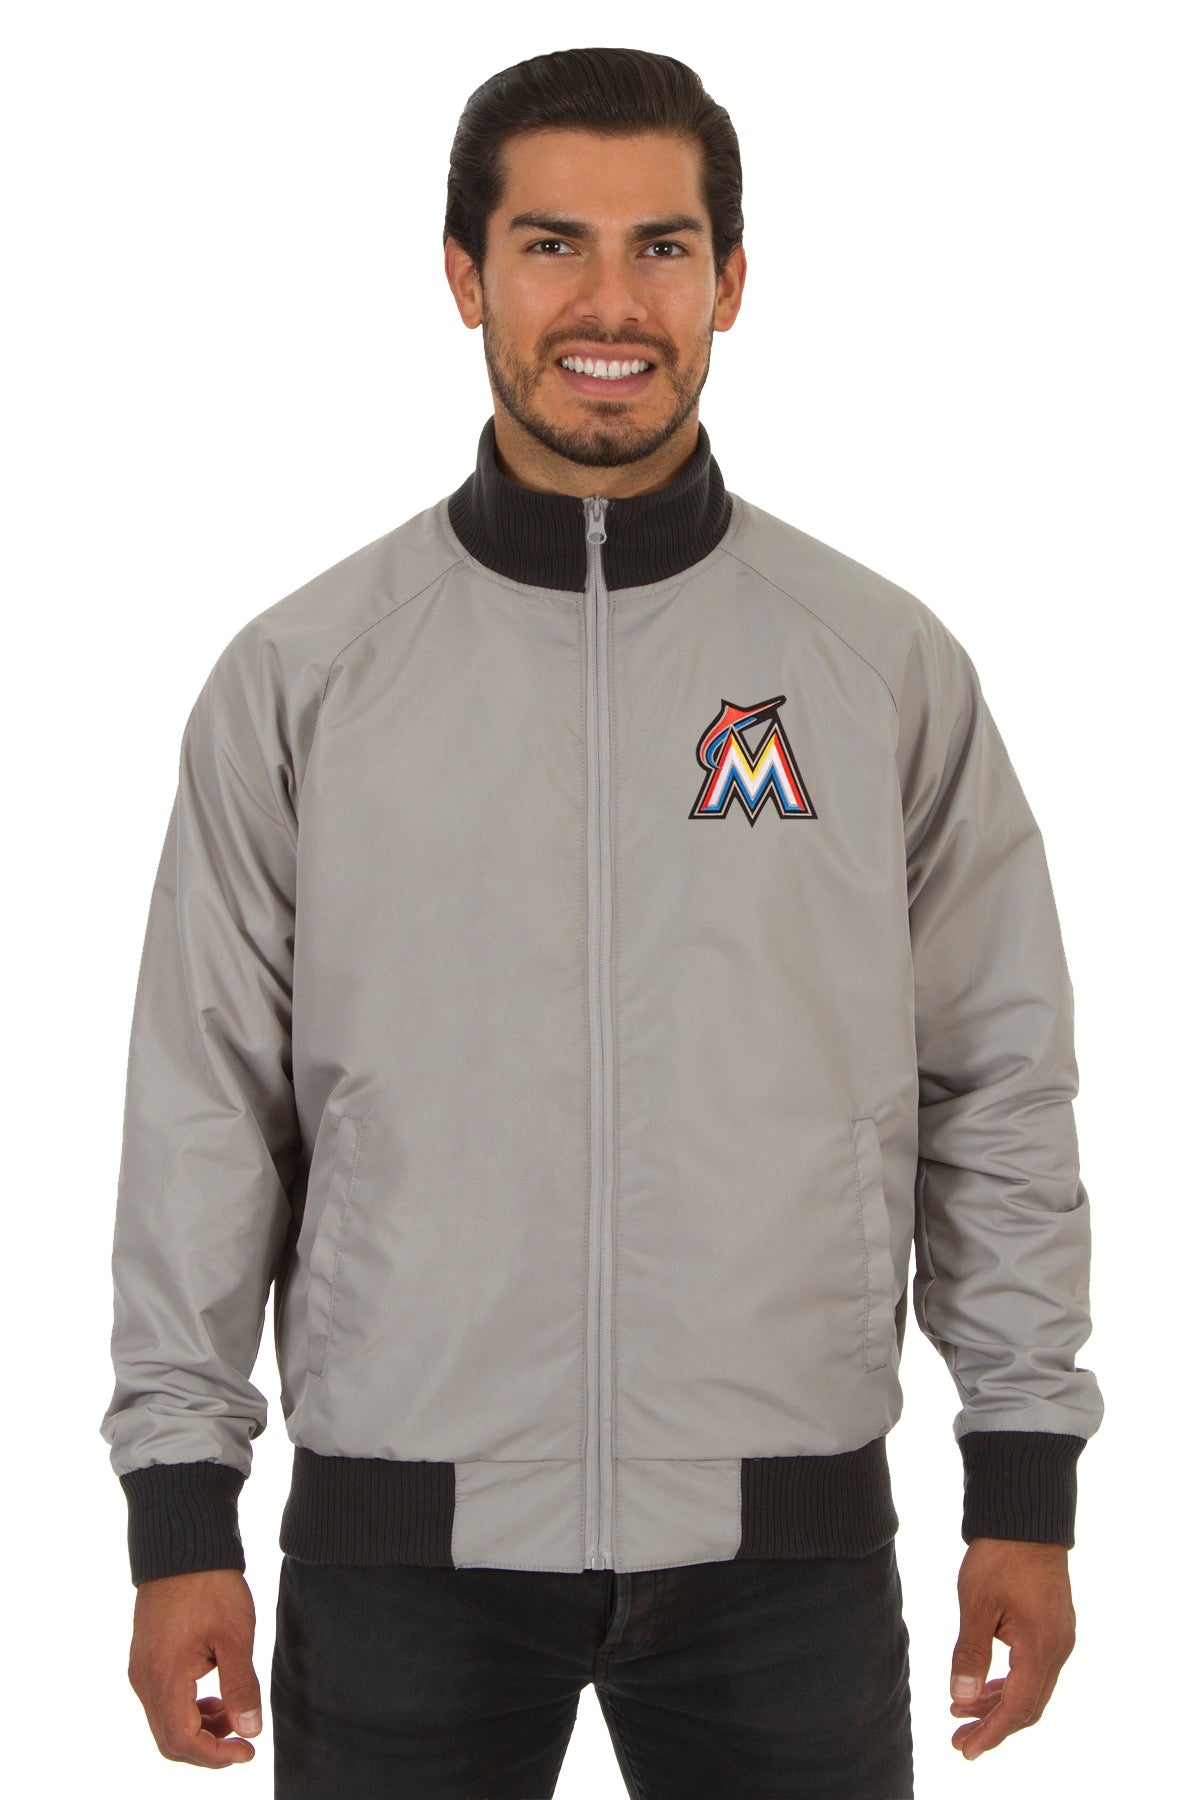 Miami Marlins Reversible Polyester Track Jacket